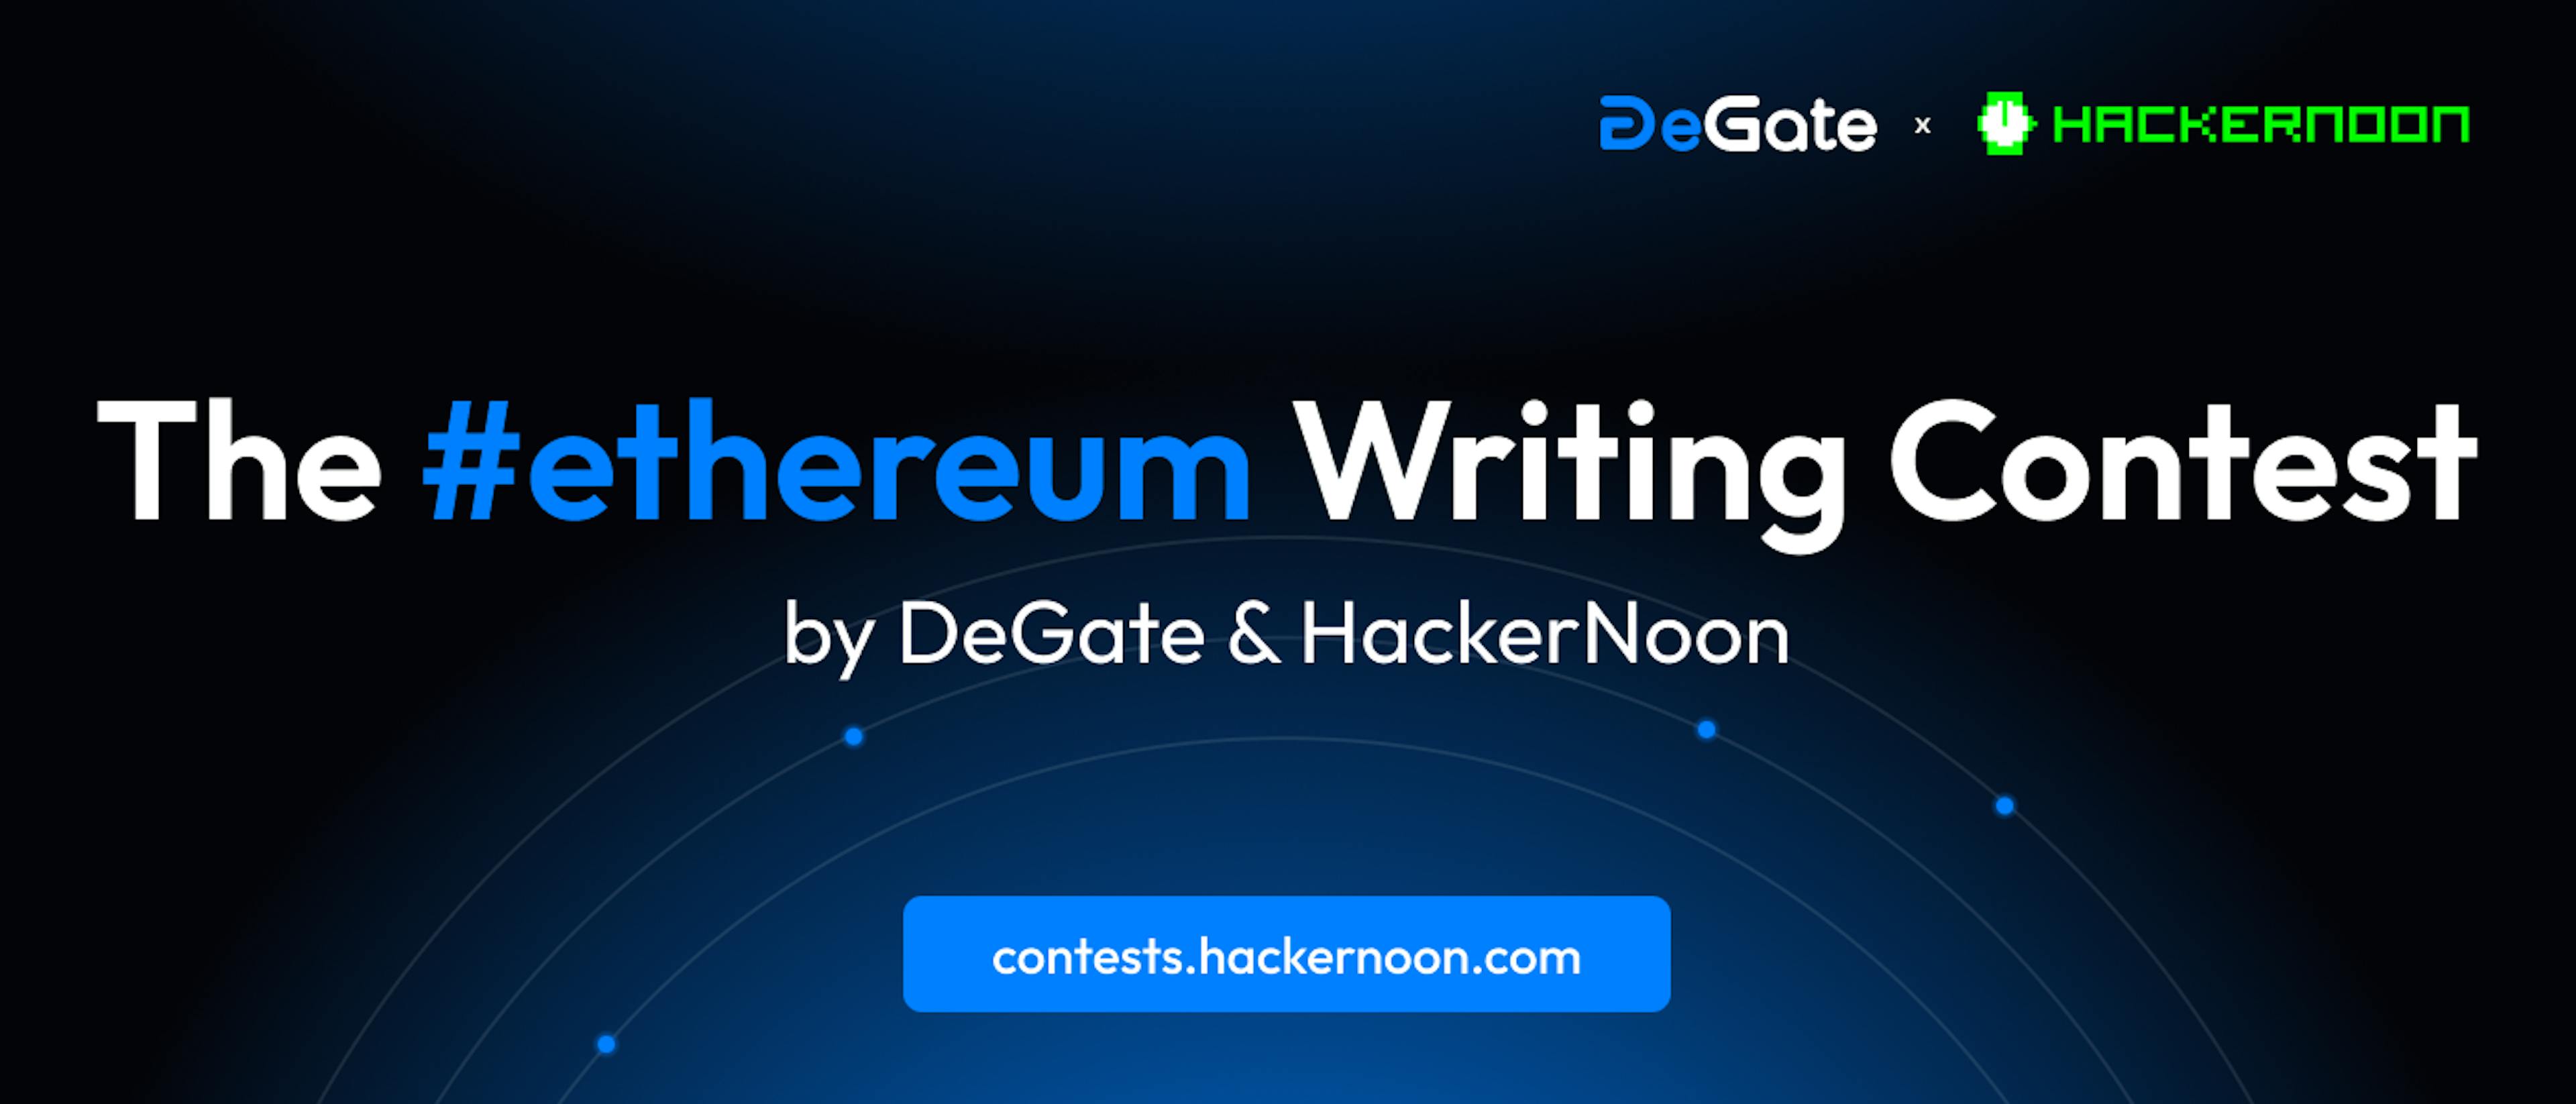 /enter-the-ethereum-writing-contest-and-compete-for-$1000-in-prizes feature image